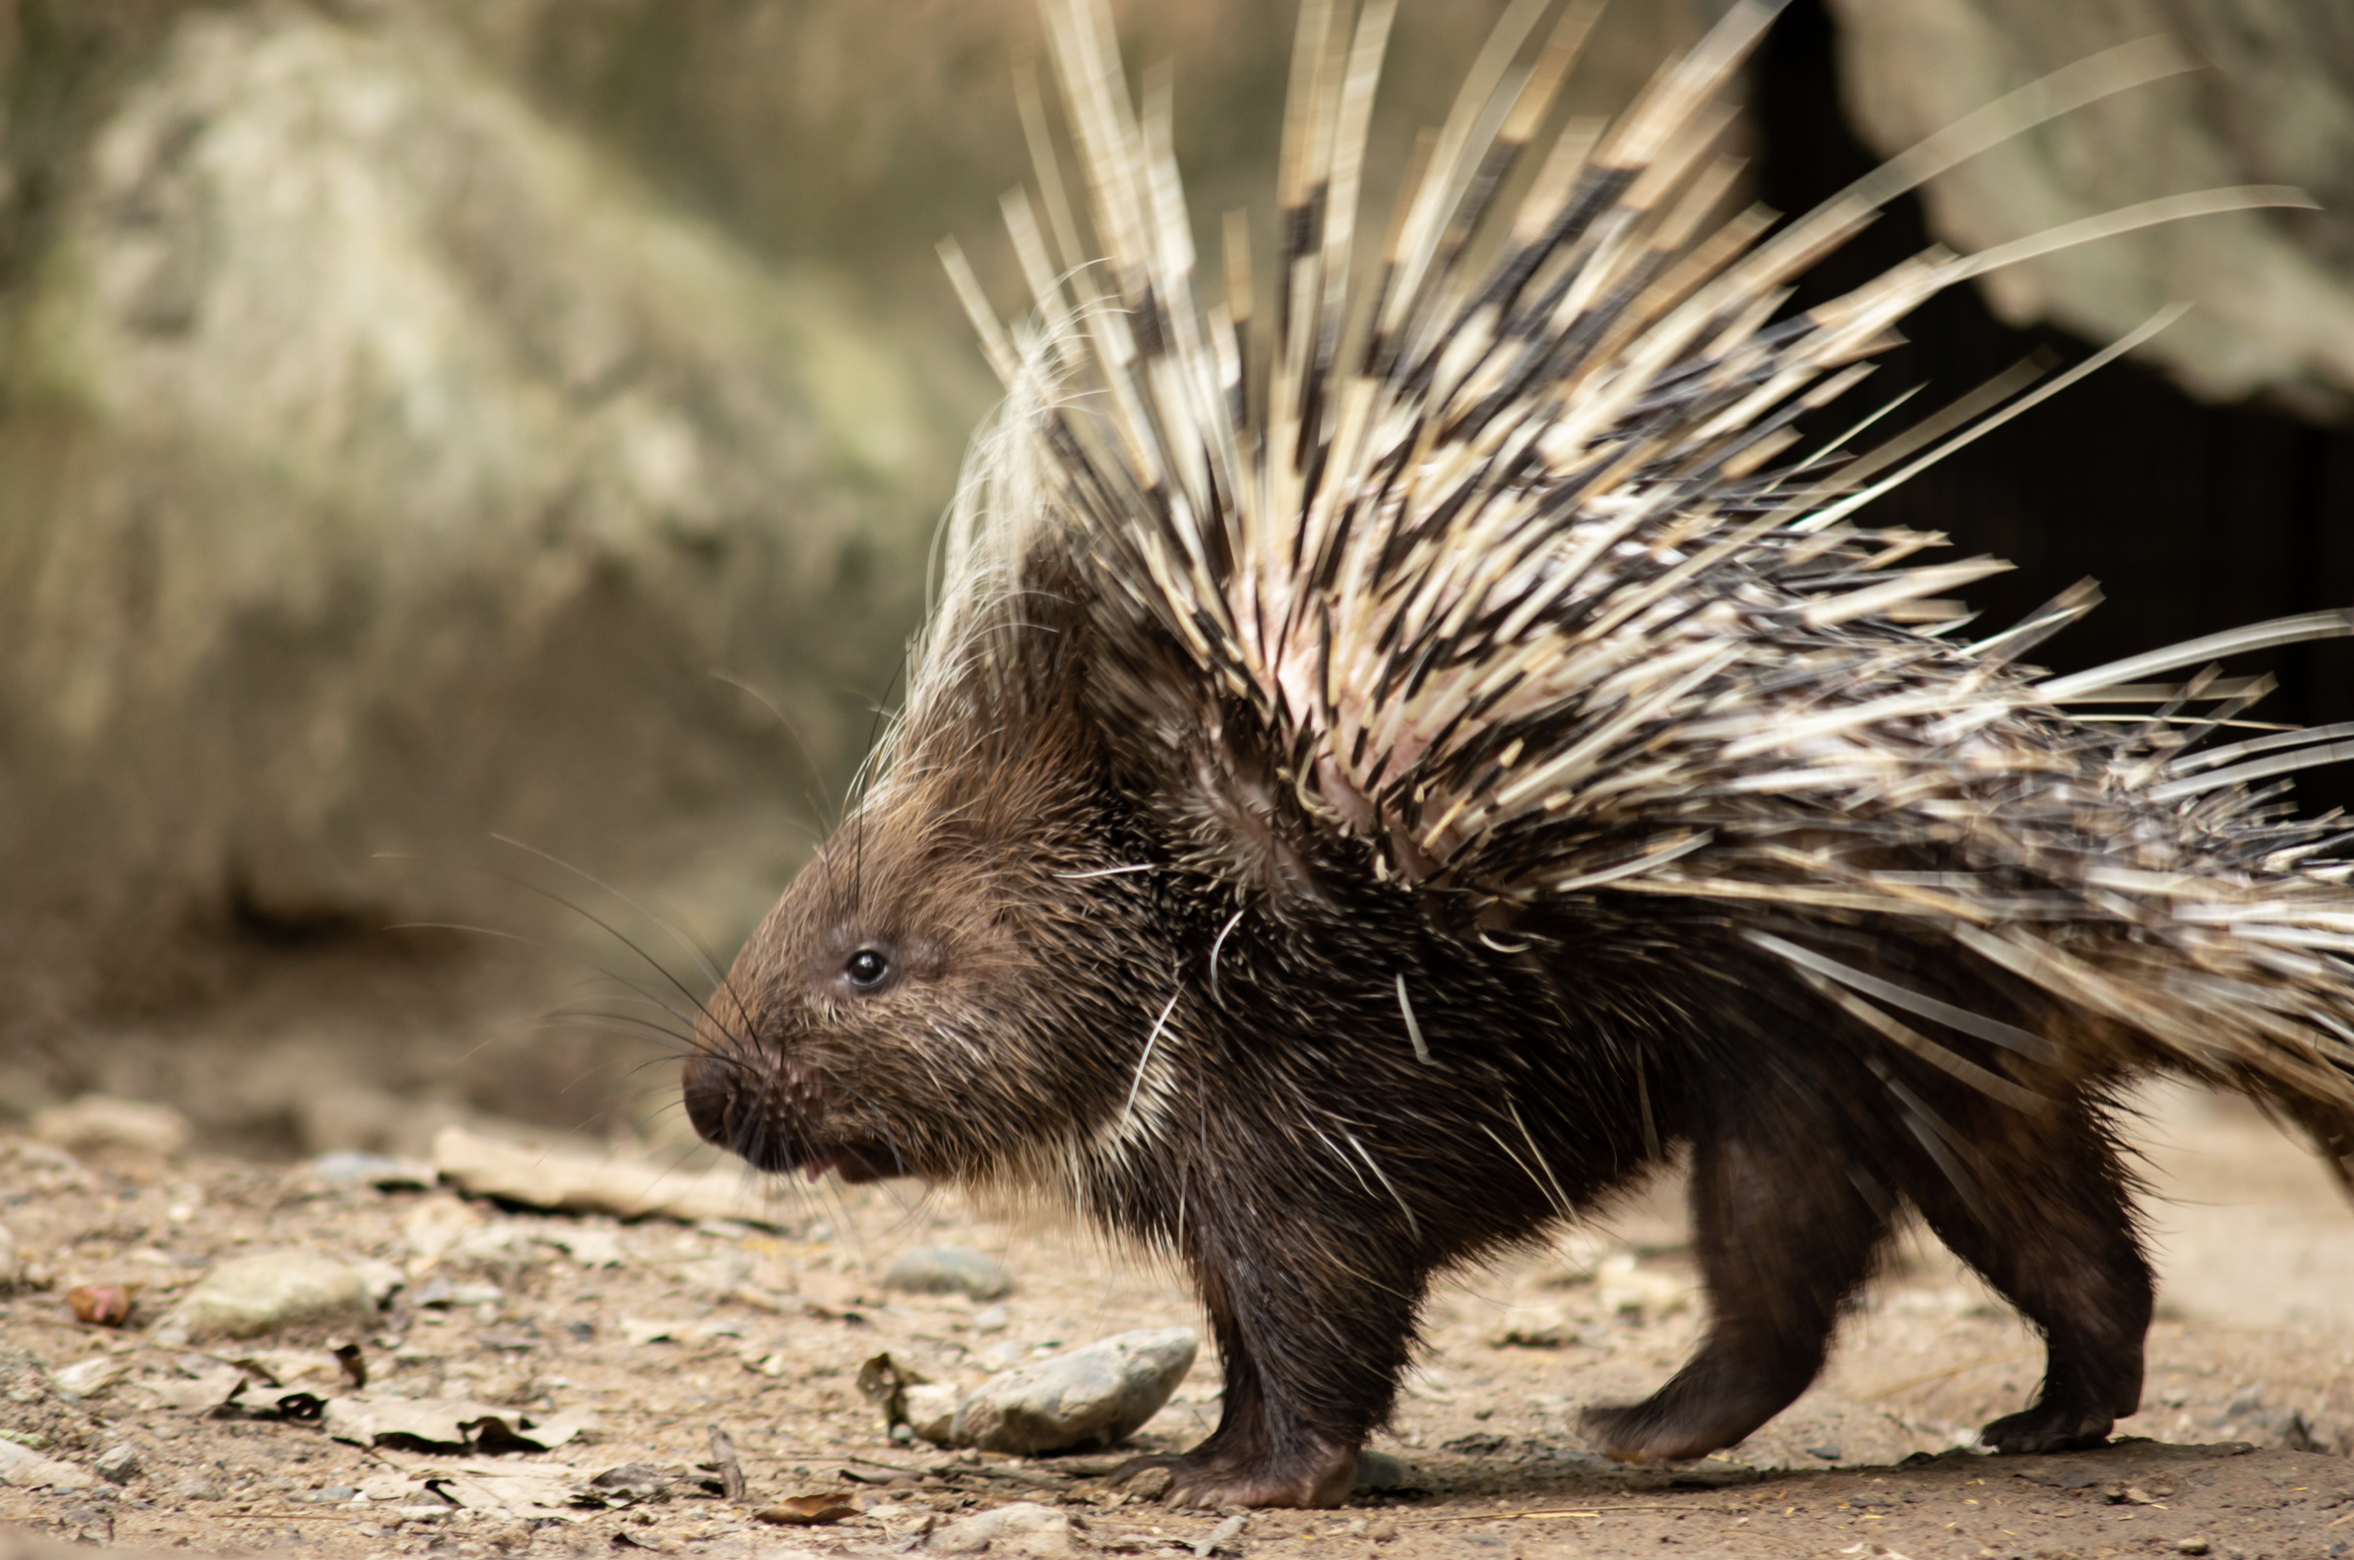 A porcupine in the wilderness